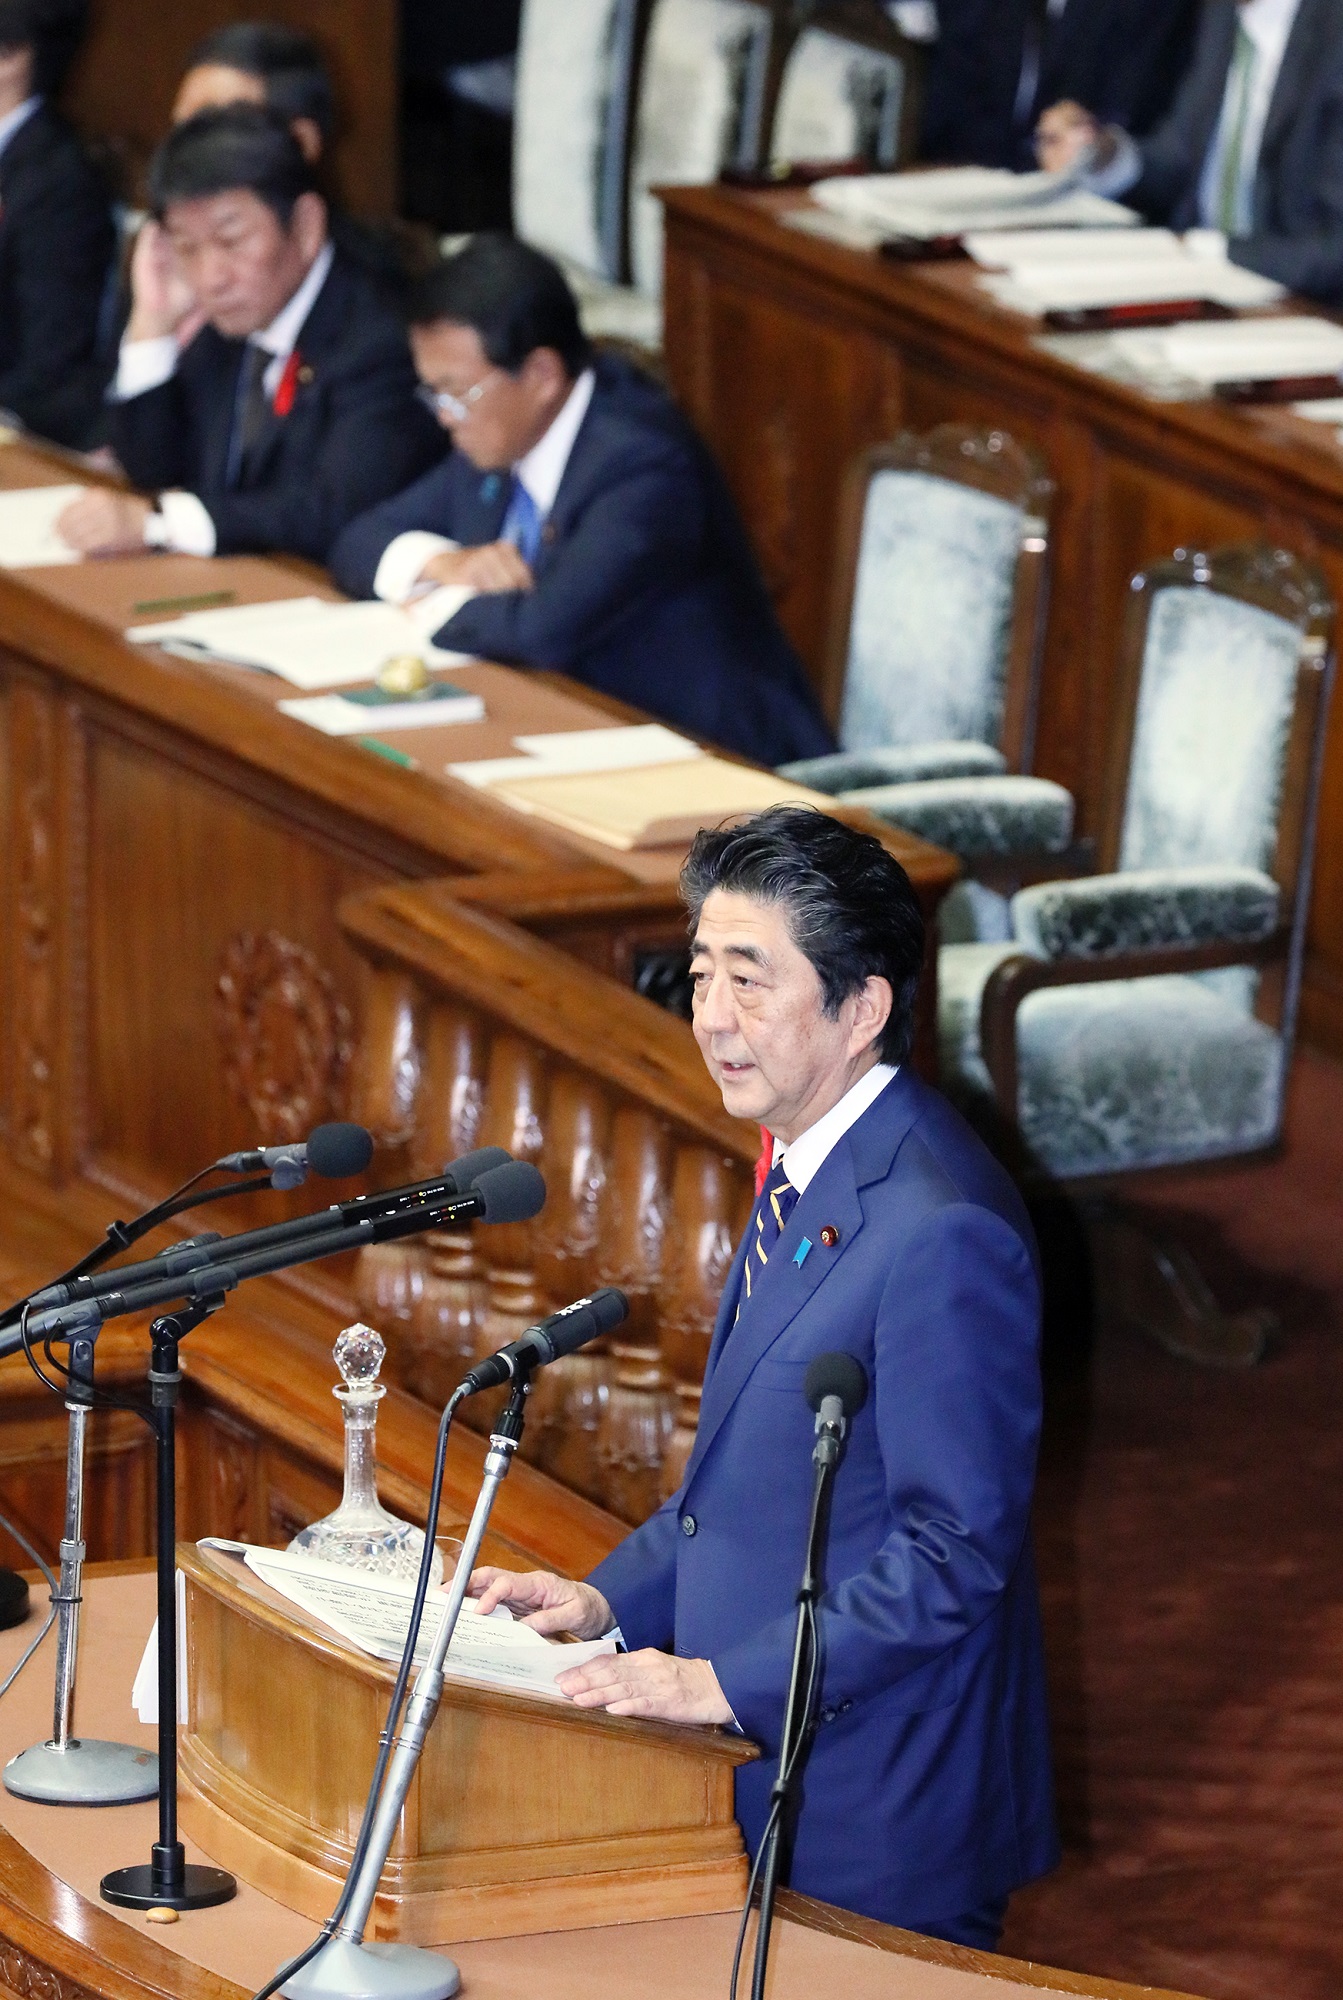 Photograph of the Prime Minister delivering a policy speech during the plenary session of the House of Representatives (9)